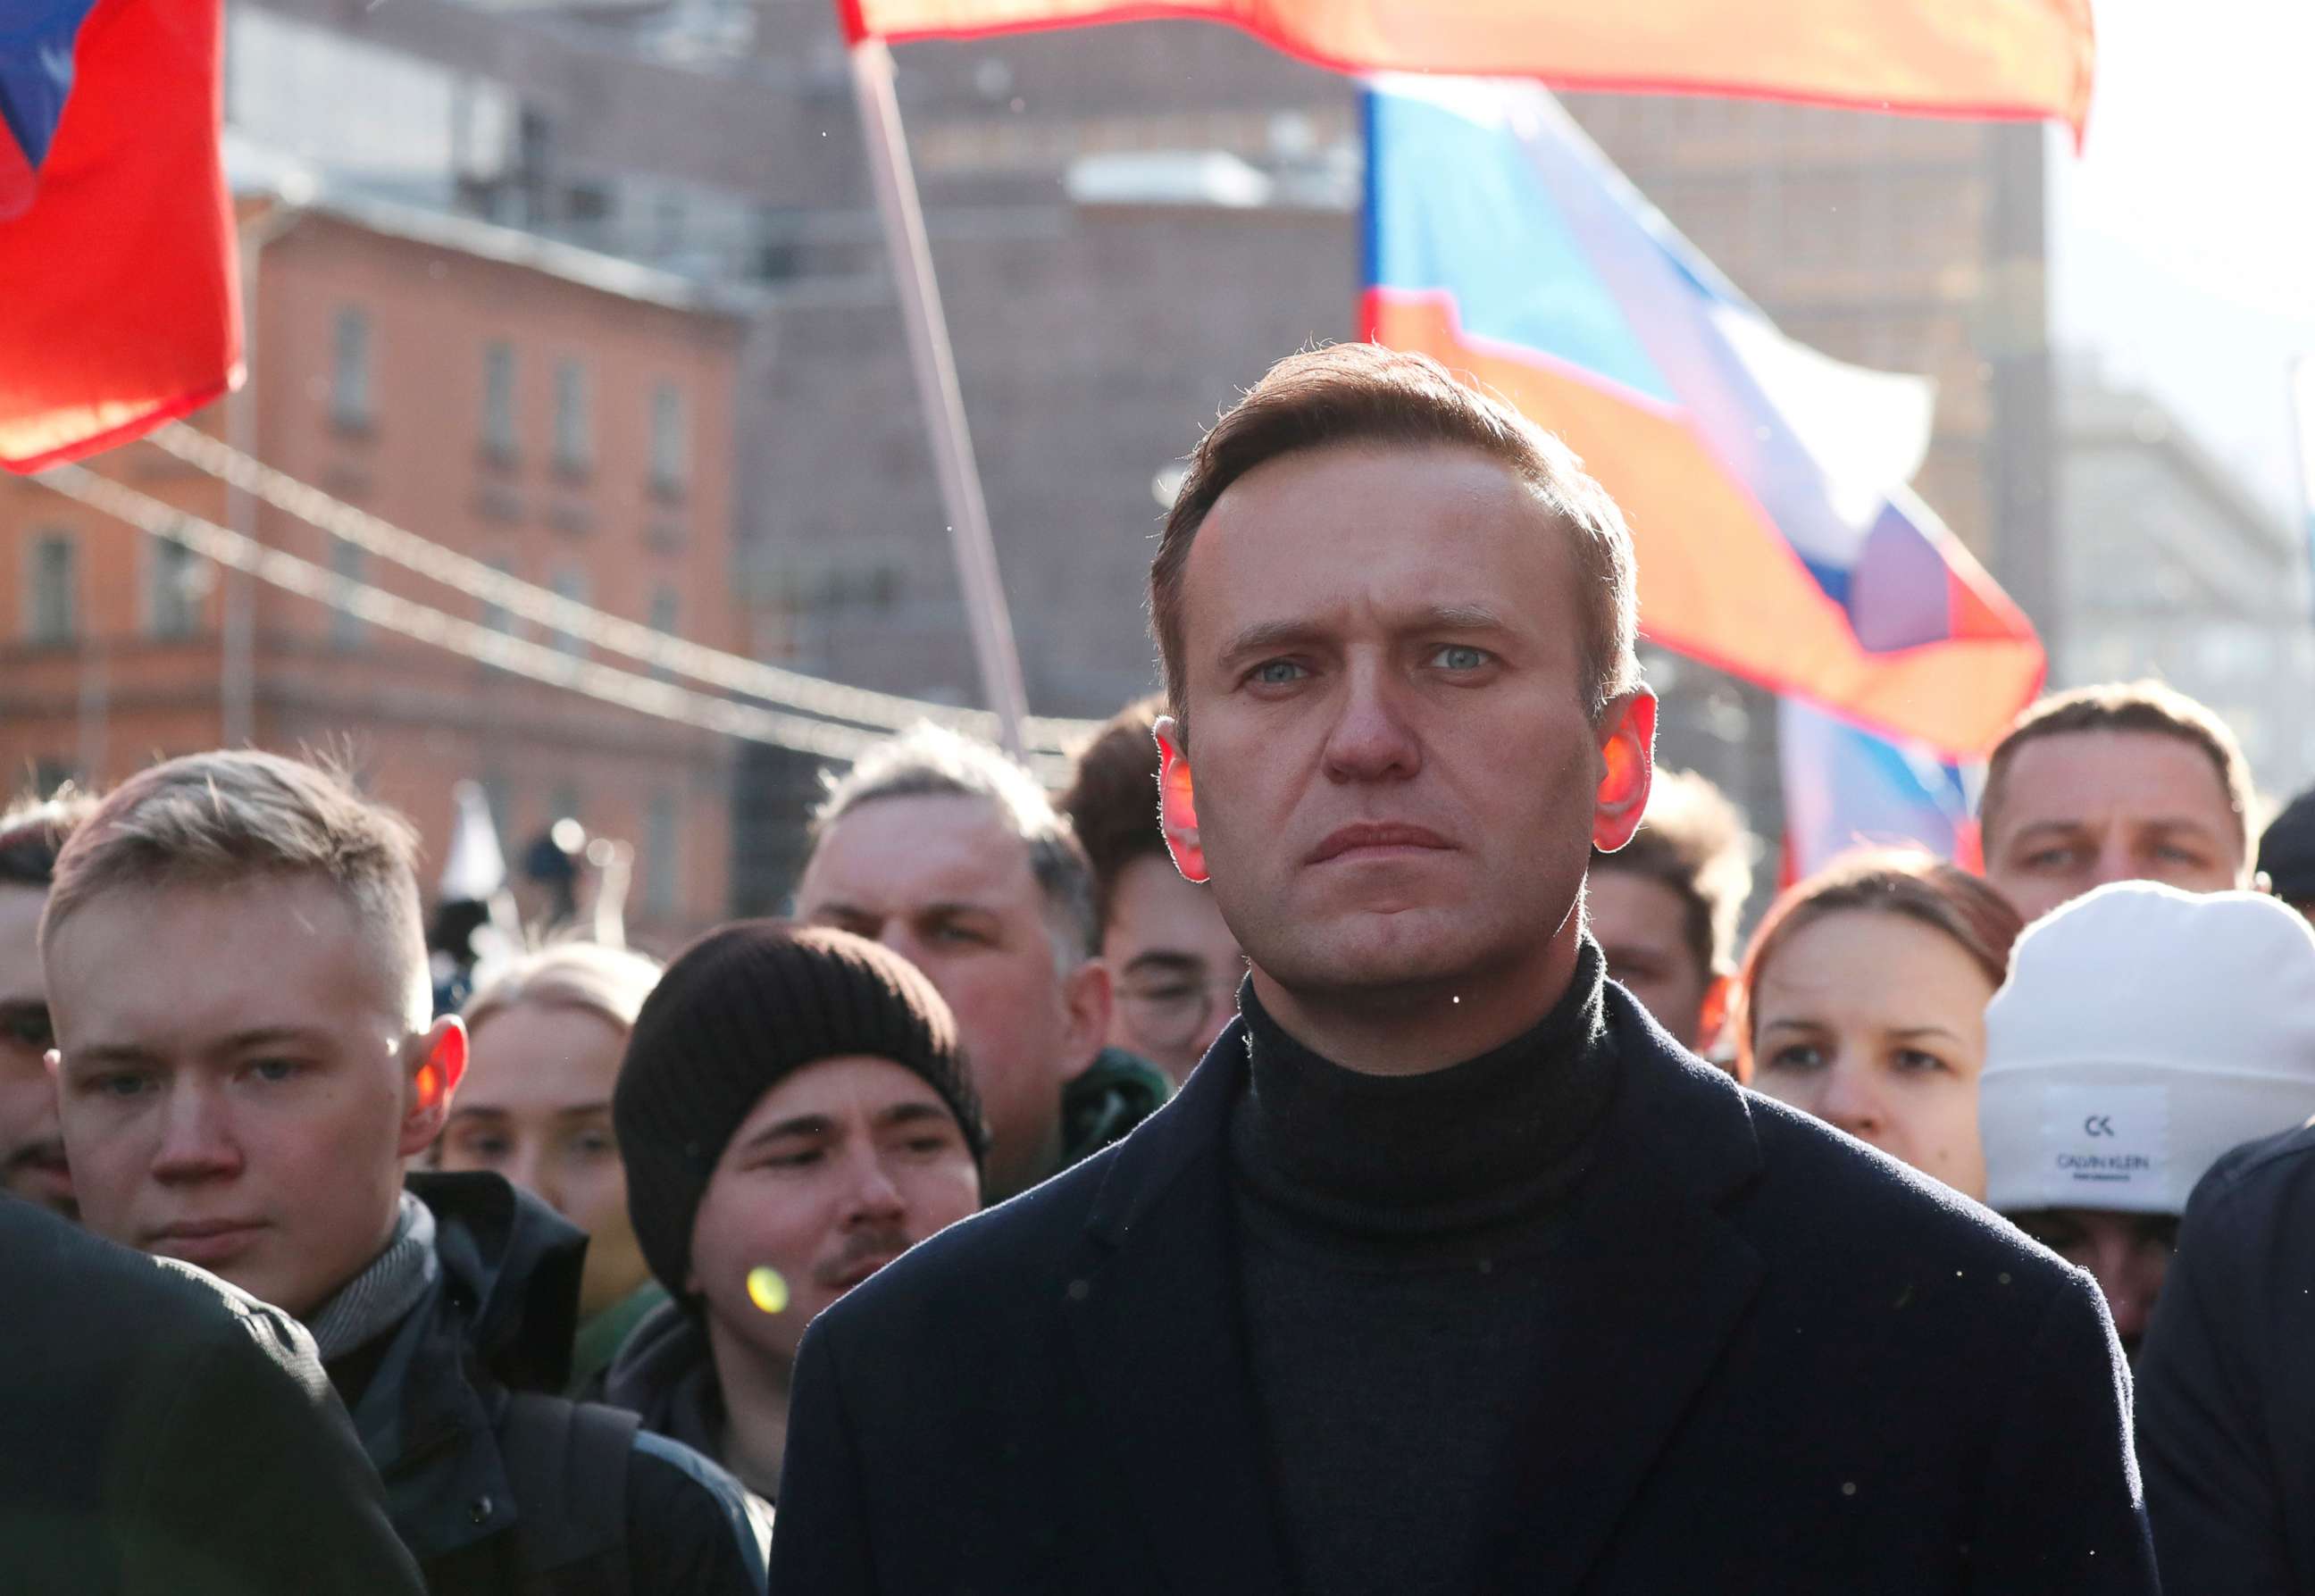 FILE PHOTO: In this Feb. 29, 2020, file photo, Russian opposition politician Alexei Navalny takes part in a rally in Moscow.